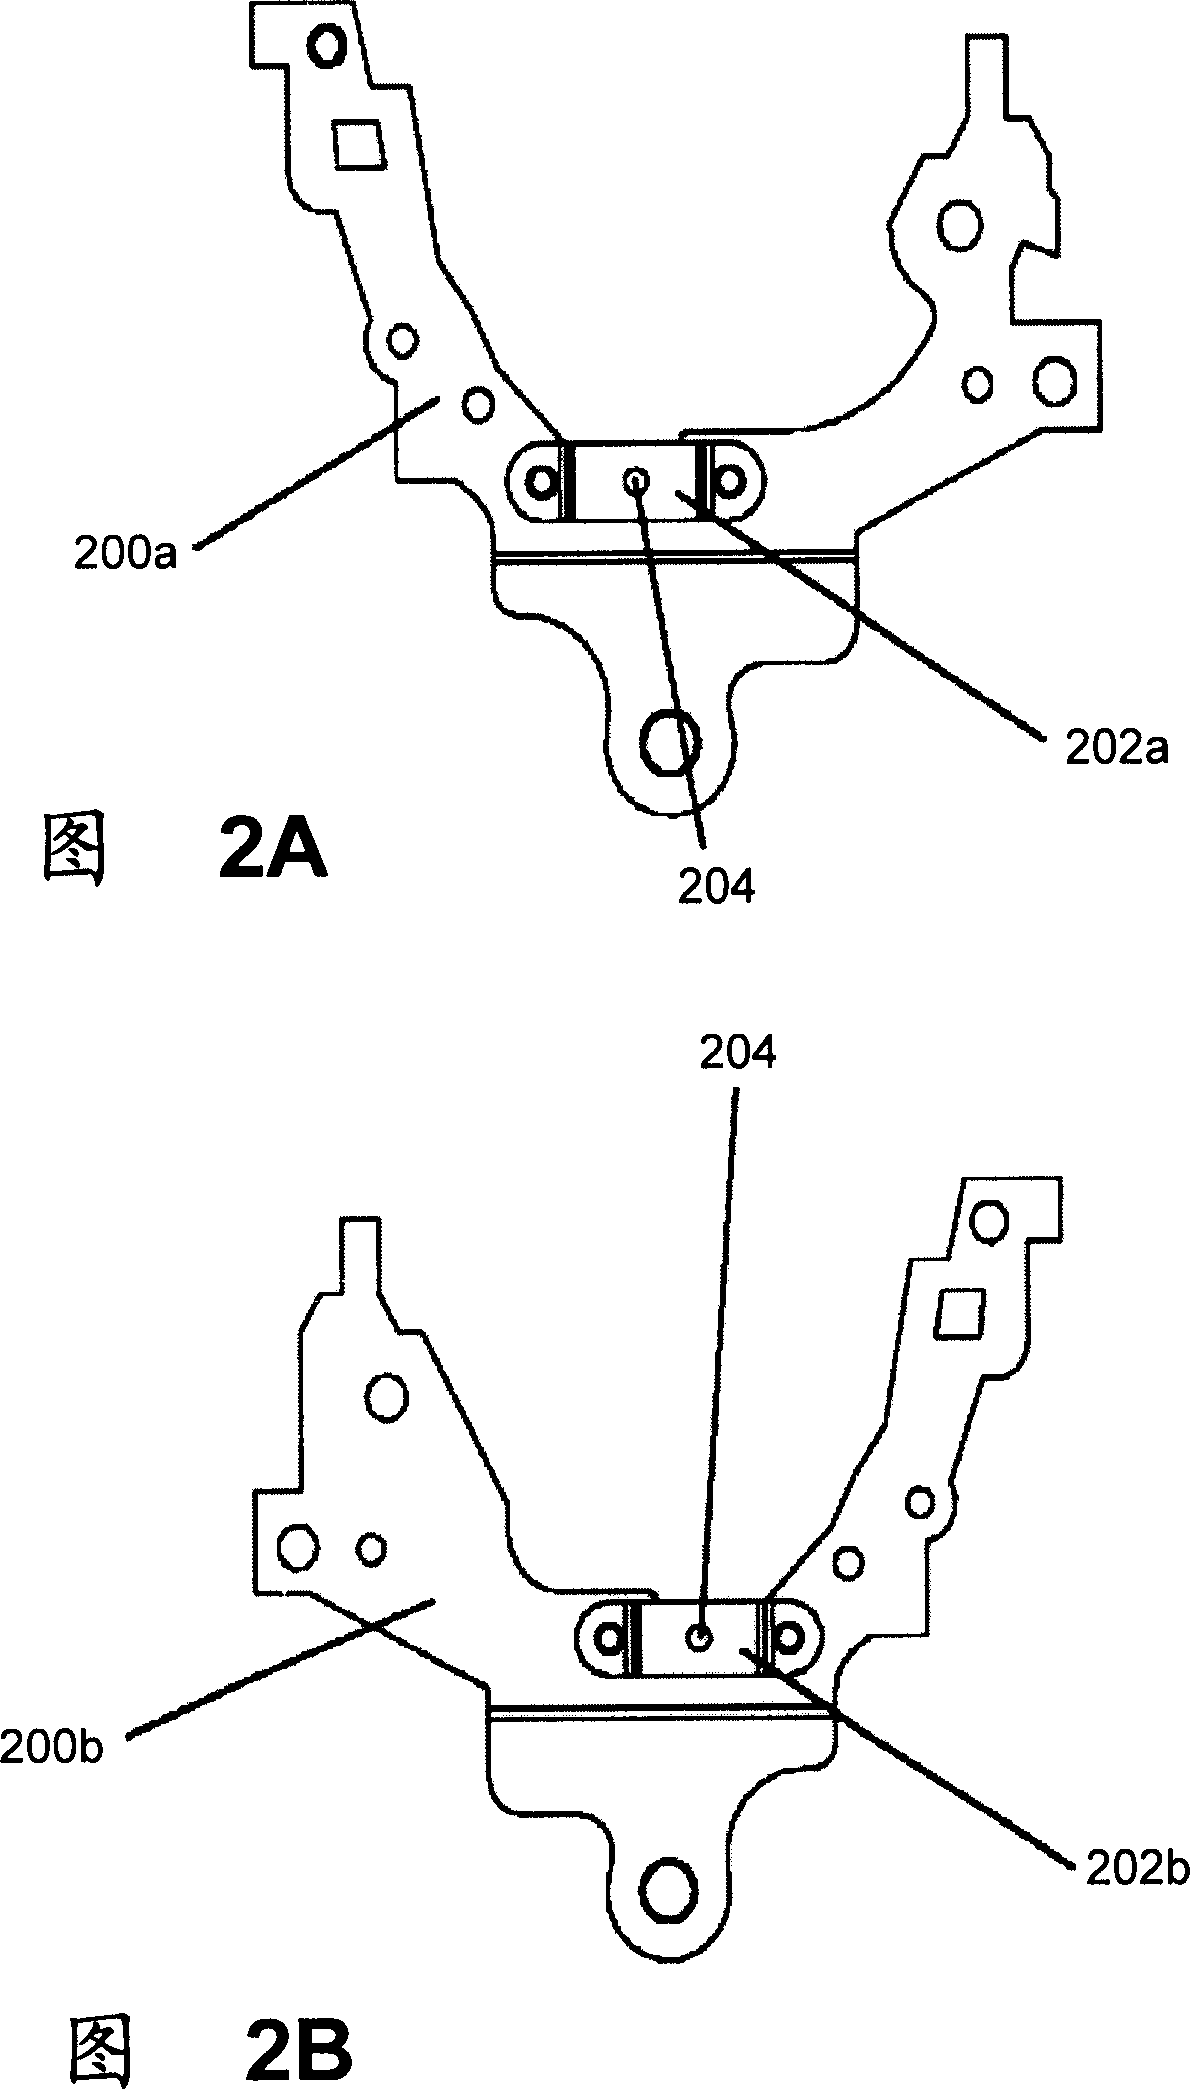 Circuit breaker actuating mechanism and its lever anti-slip structure